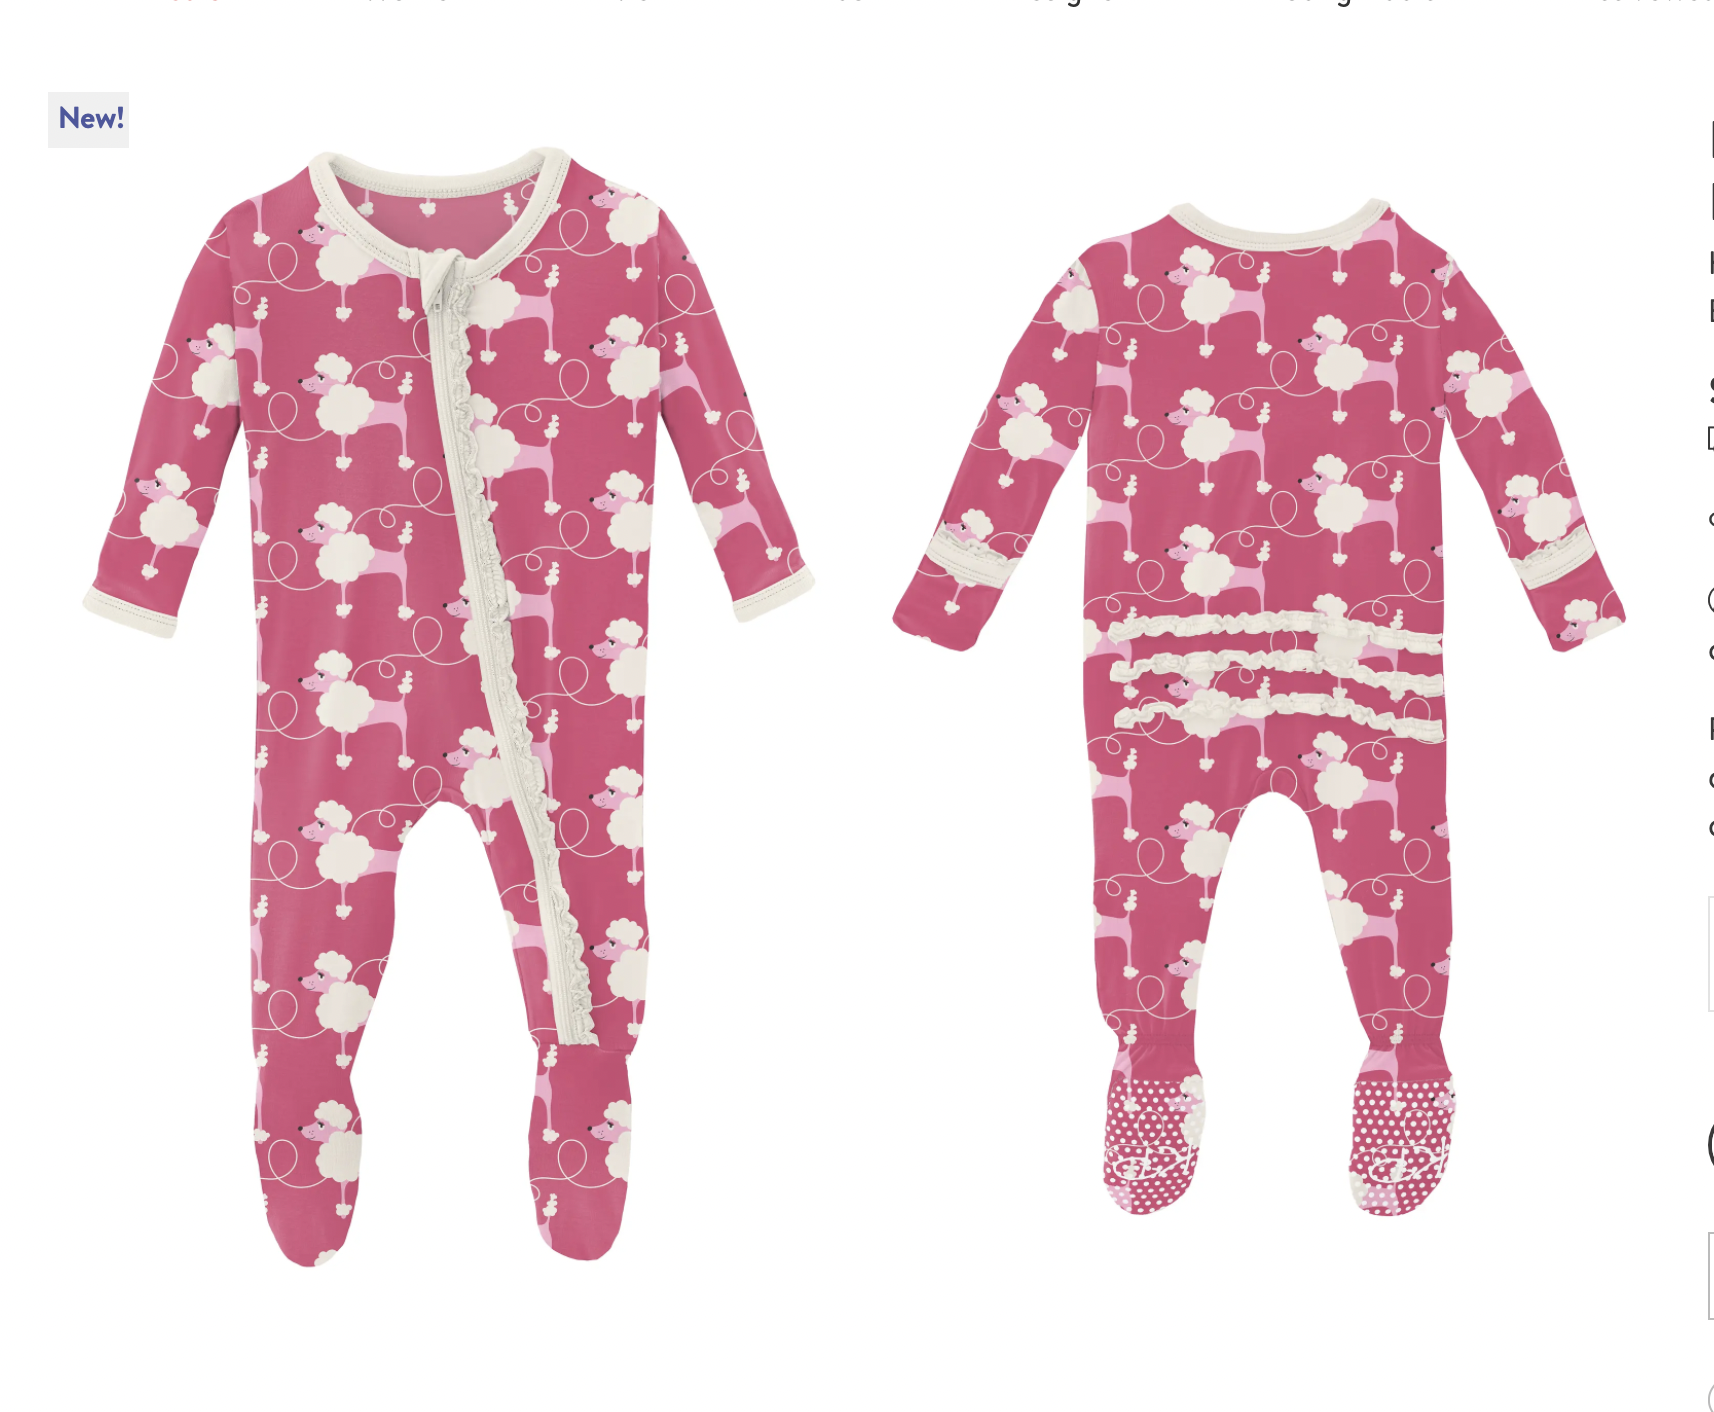 Kickee Celebrate Innocence Print Muffin Ruffle Footie with Zipper - Flamingo Poodles